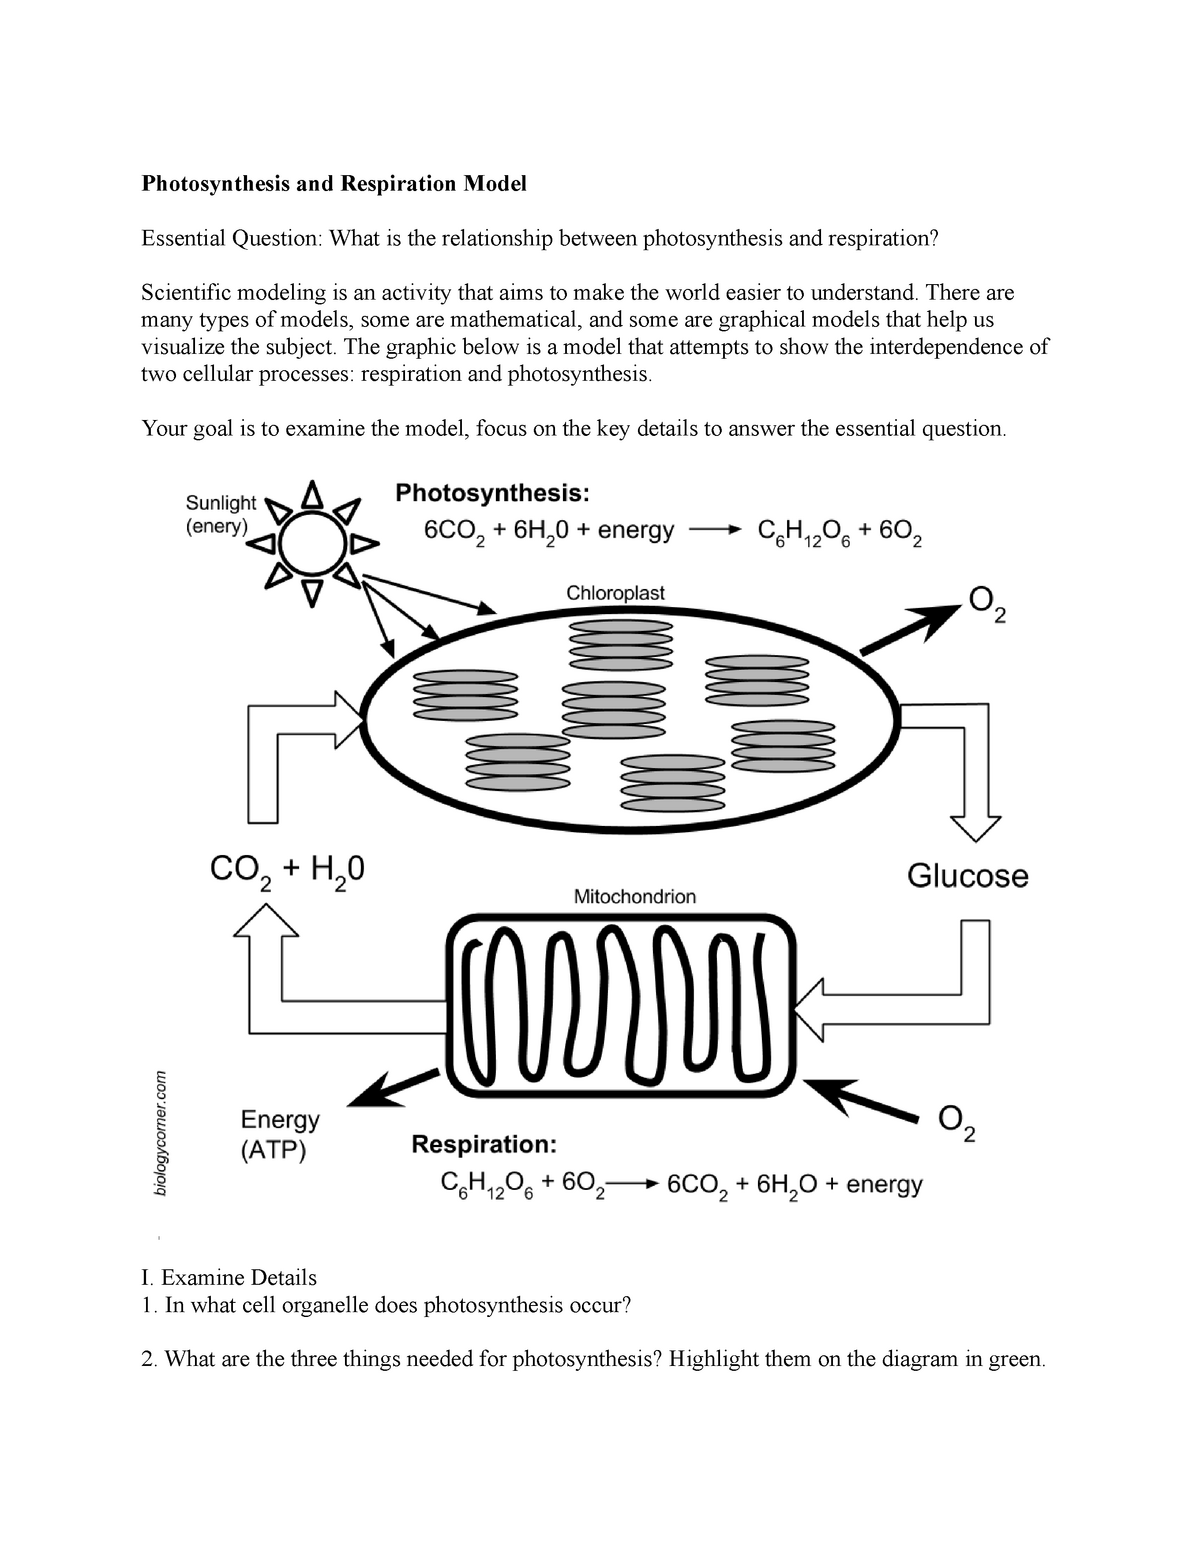 Photosynthesis and Respiration Model - Photosynthesis and Throughout Photosynthesis And Respiration Worksheet